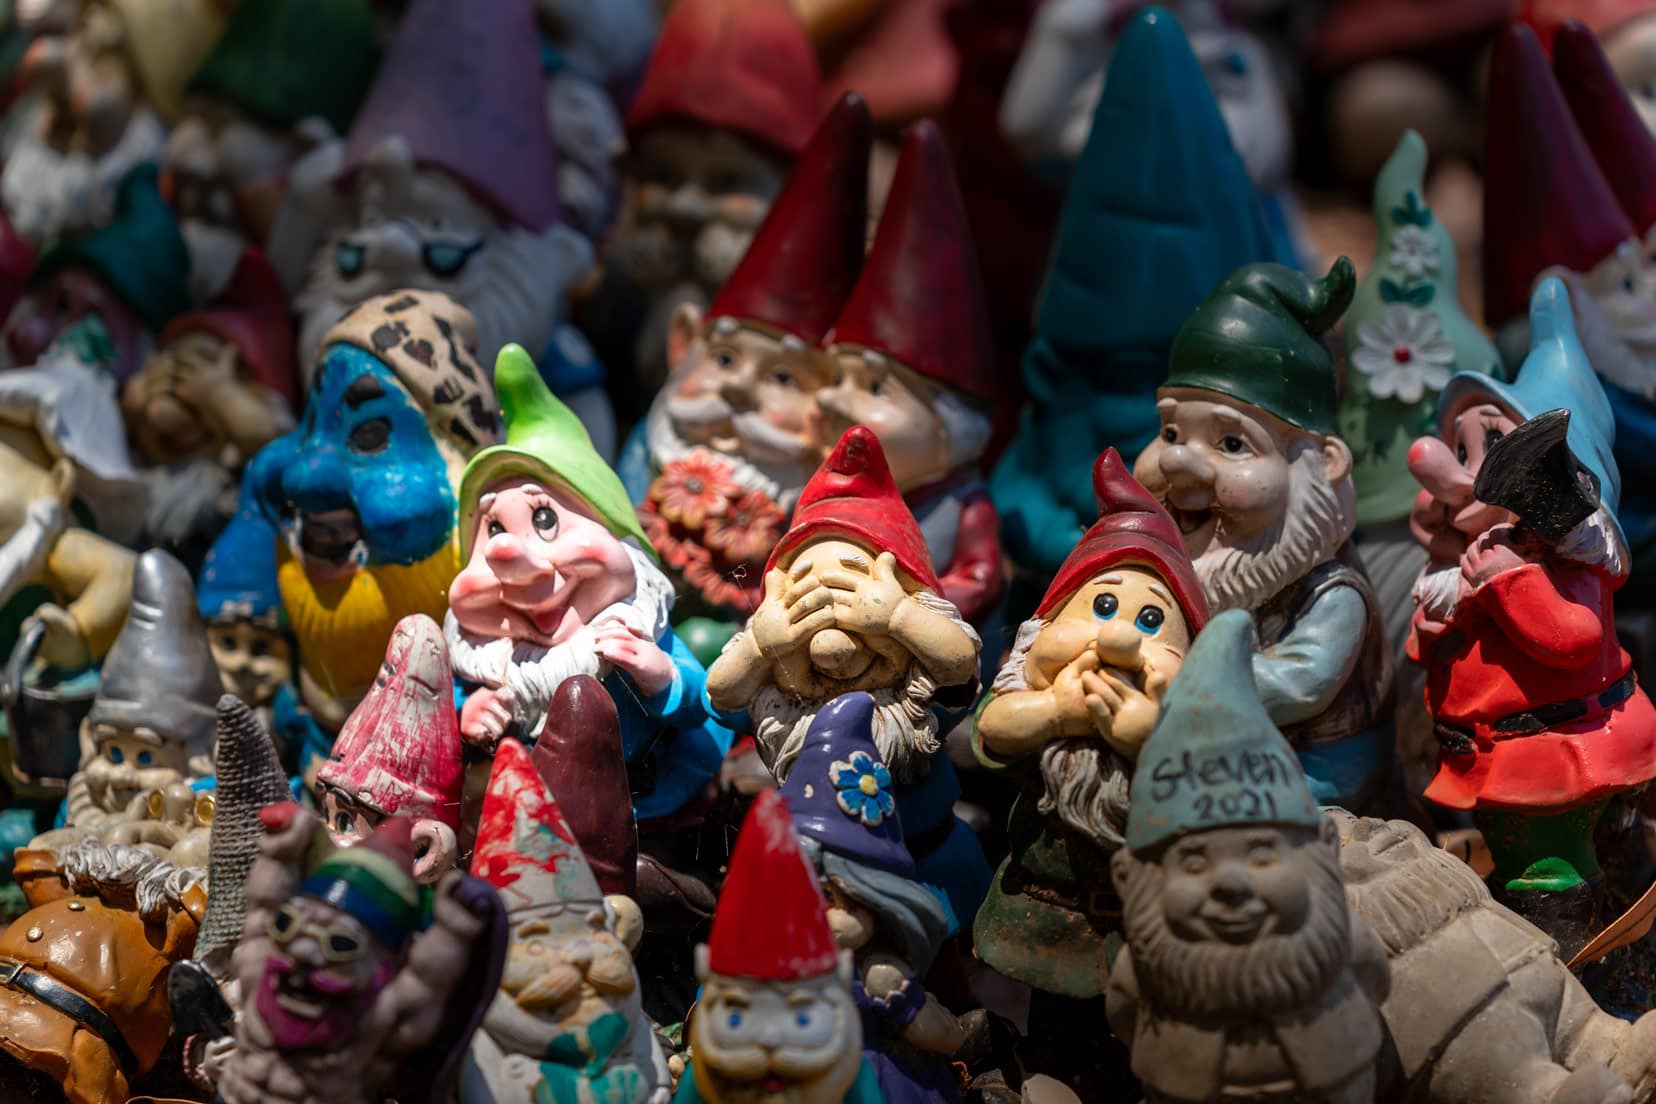 Group of gnomes